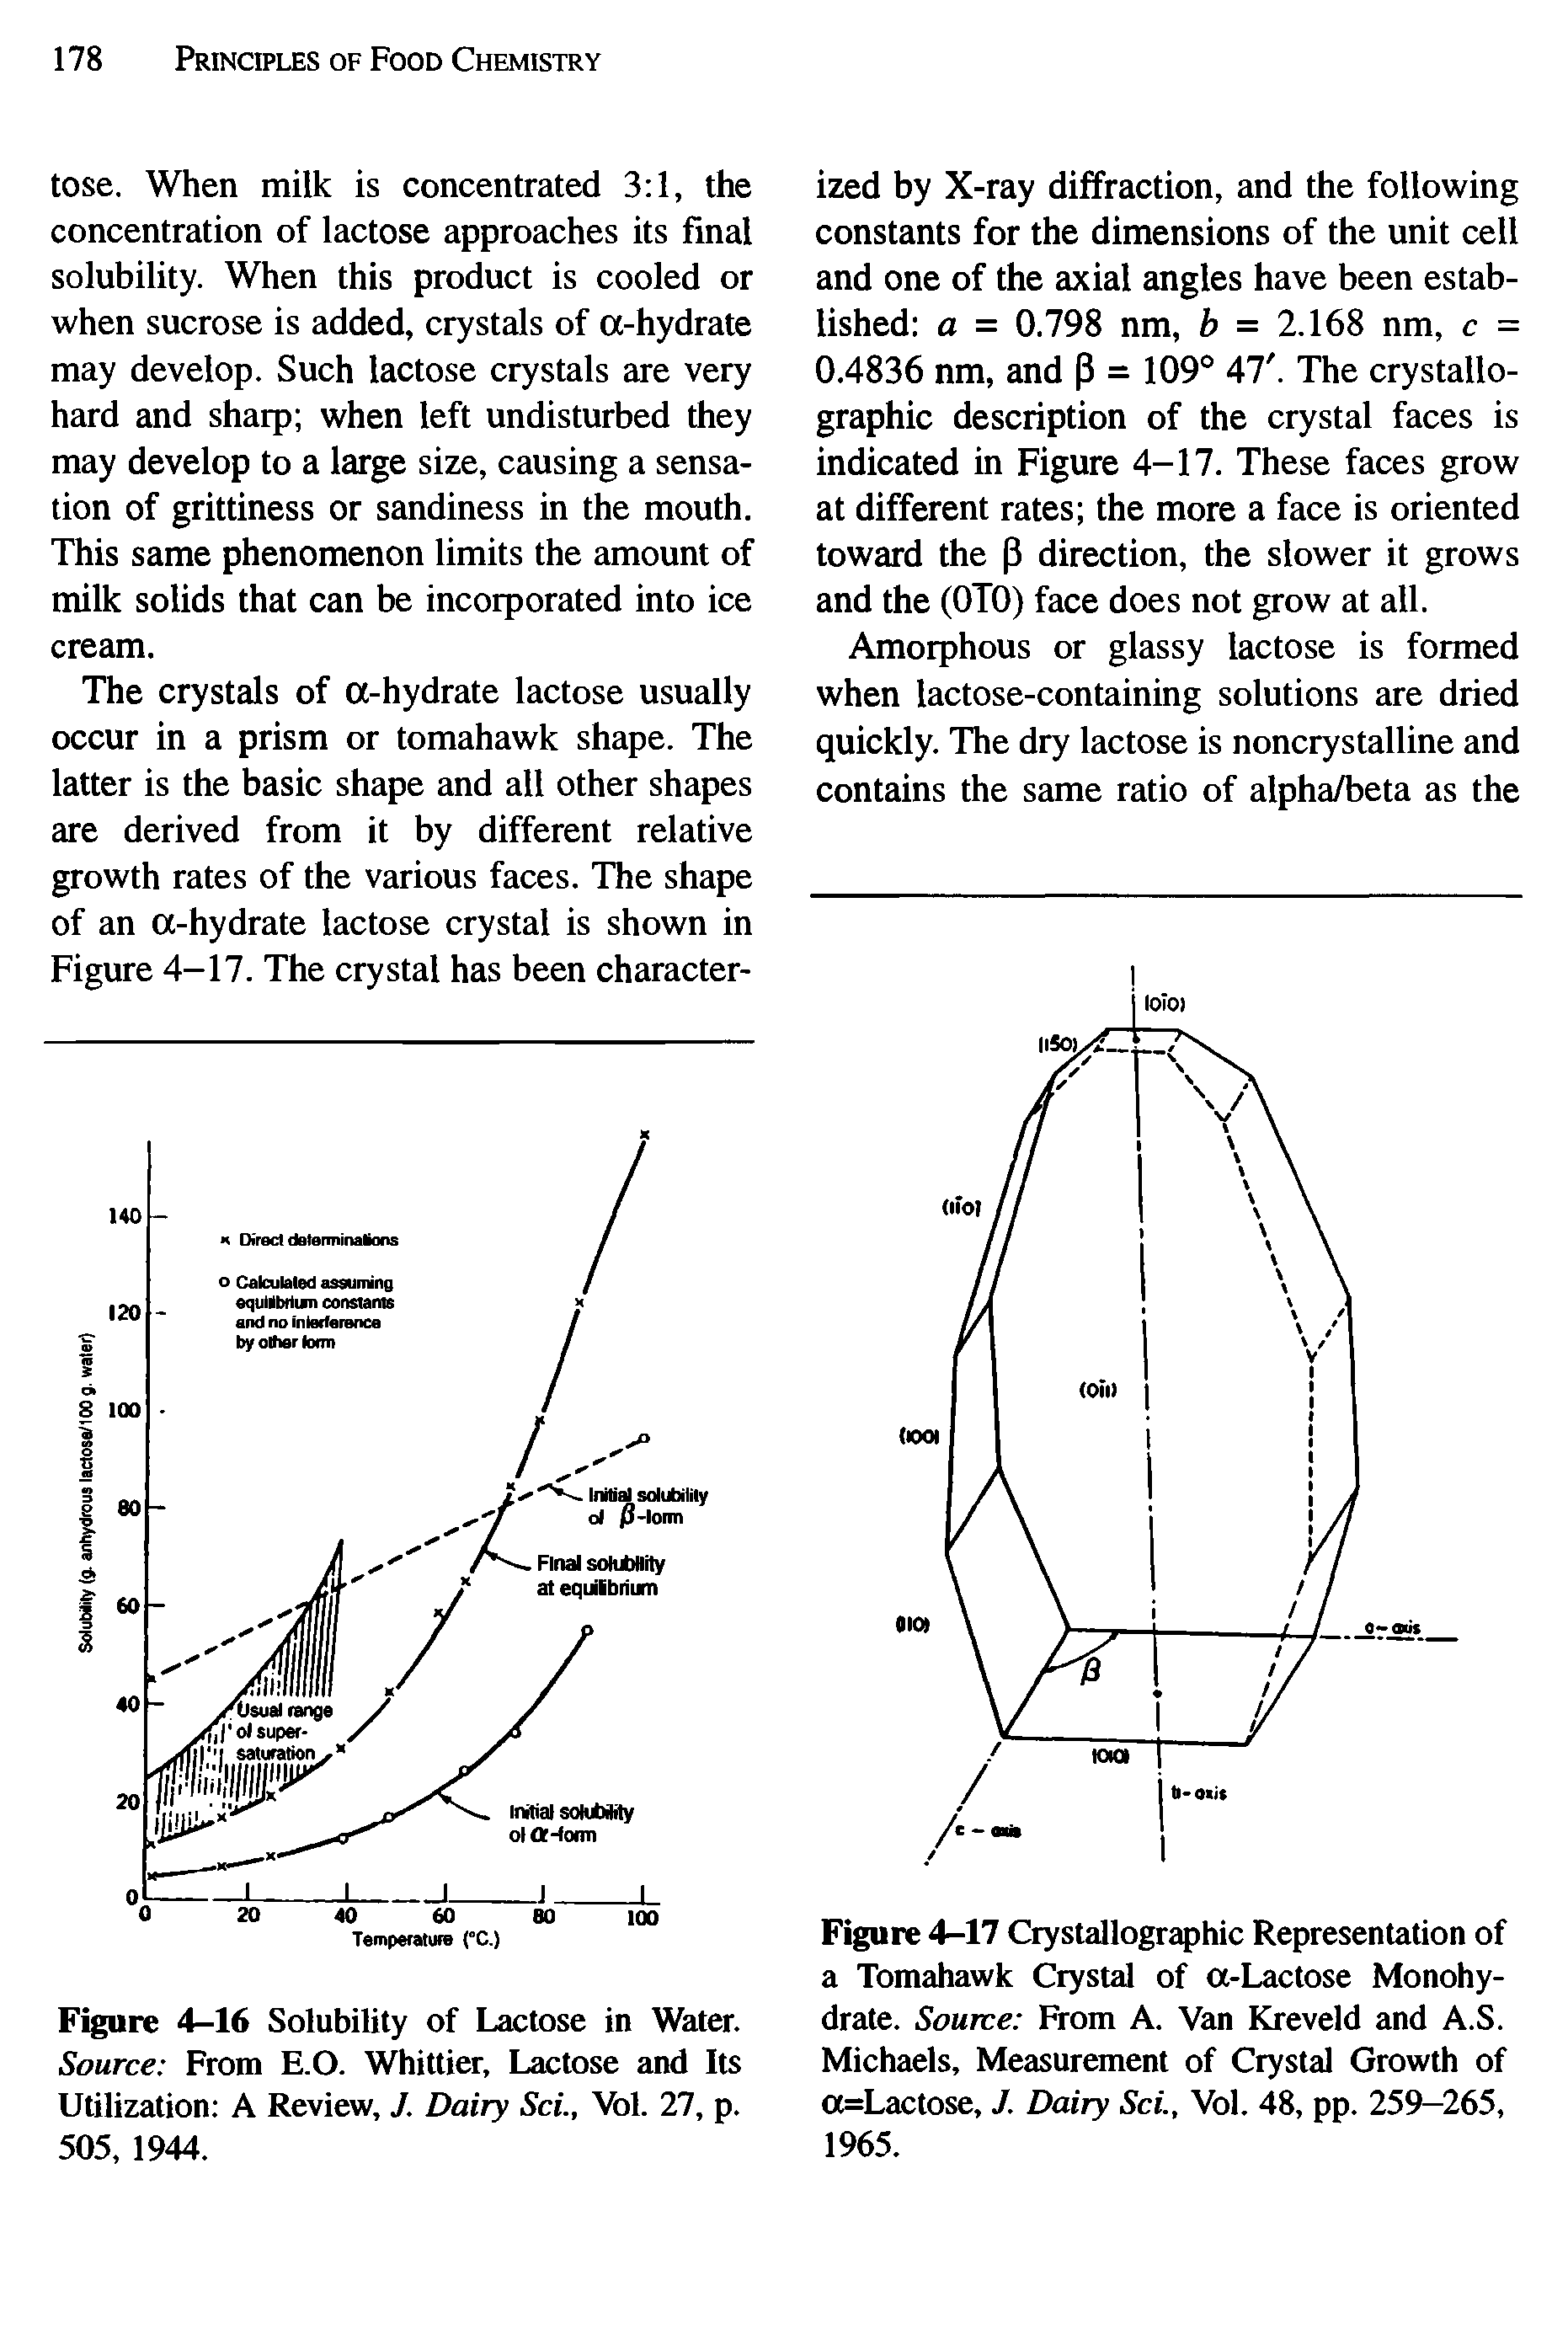 Figure 4-17 Crystallographic Representation of a Tomahawk Crystal of a-Lactose Monohydrate. Source From A. Van Kreveld and A.S. Michaels, Measurement of Crystal Growth of a=Lactose, J. Dairy Sci., Vol. 48, pp. 259—265, 1965.